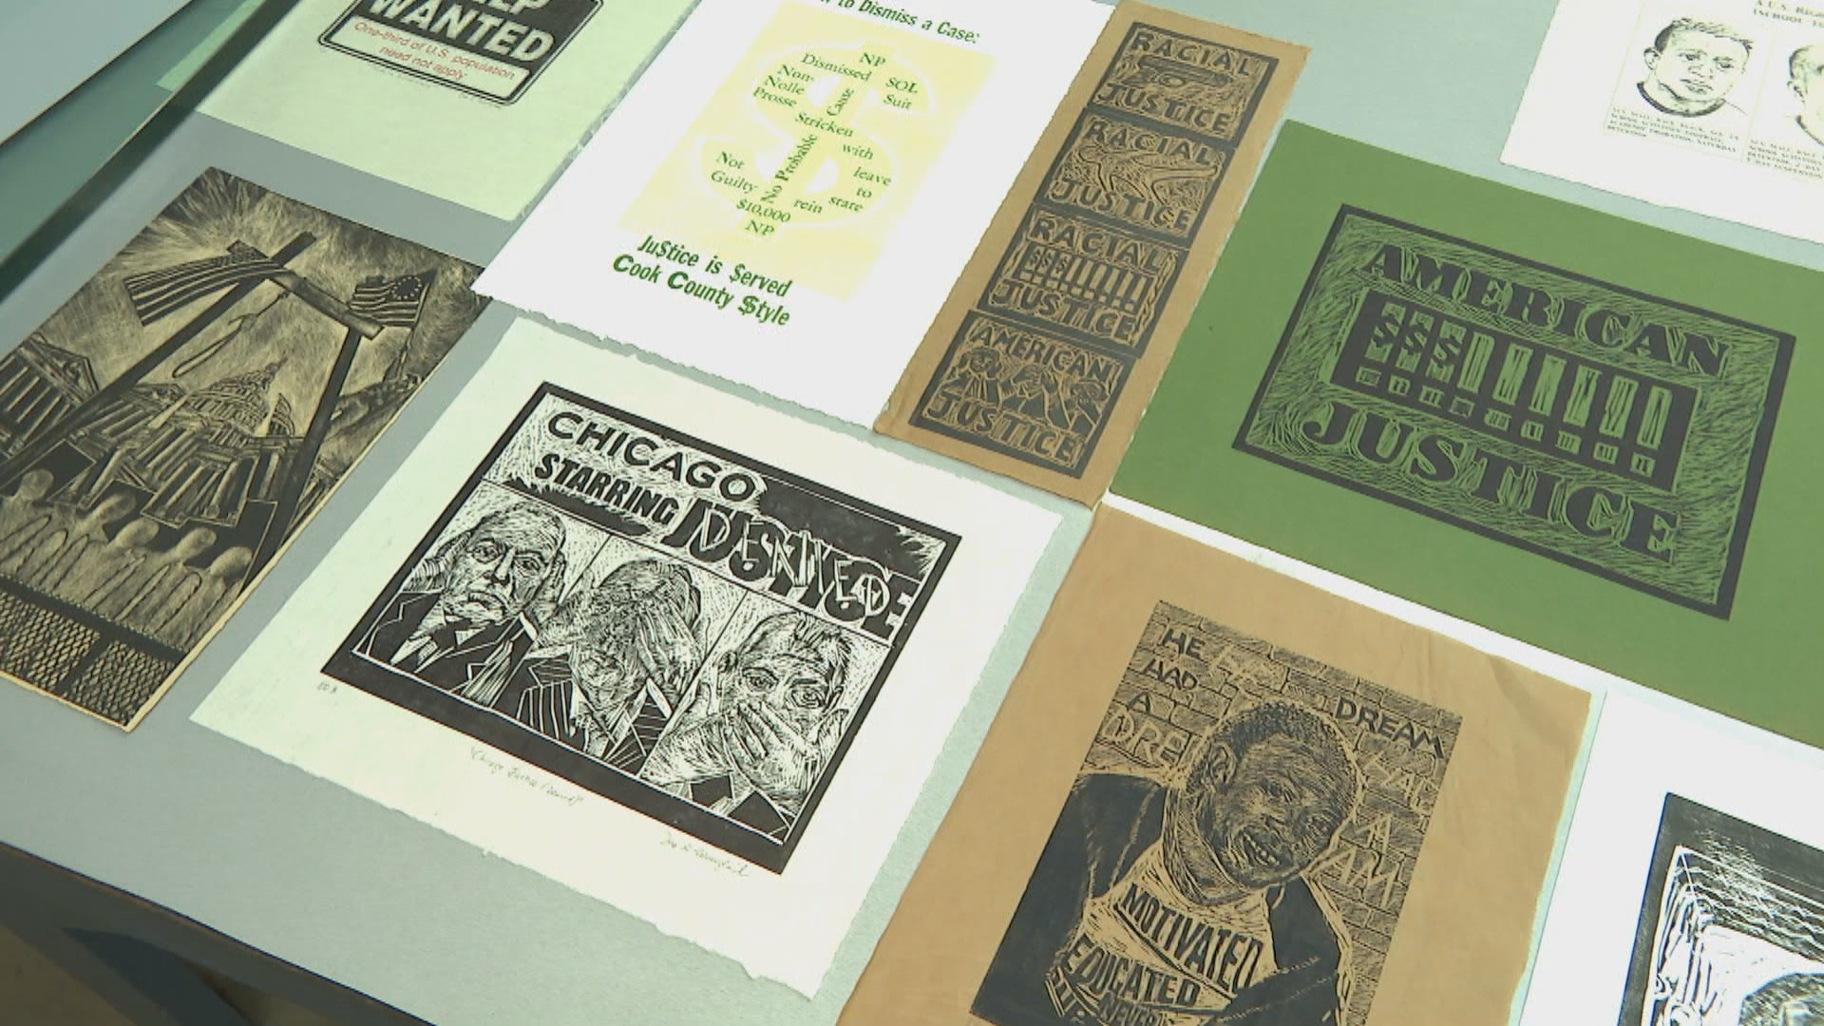 Lawyer and artist Ina Silvergleid uses printmaking to improve criminal justice reform. (WTTW News)